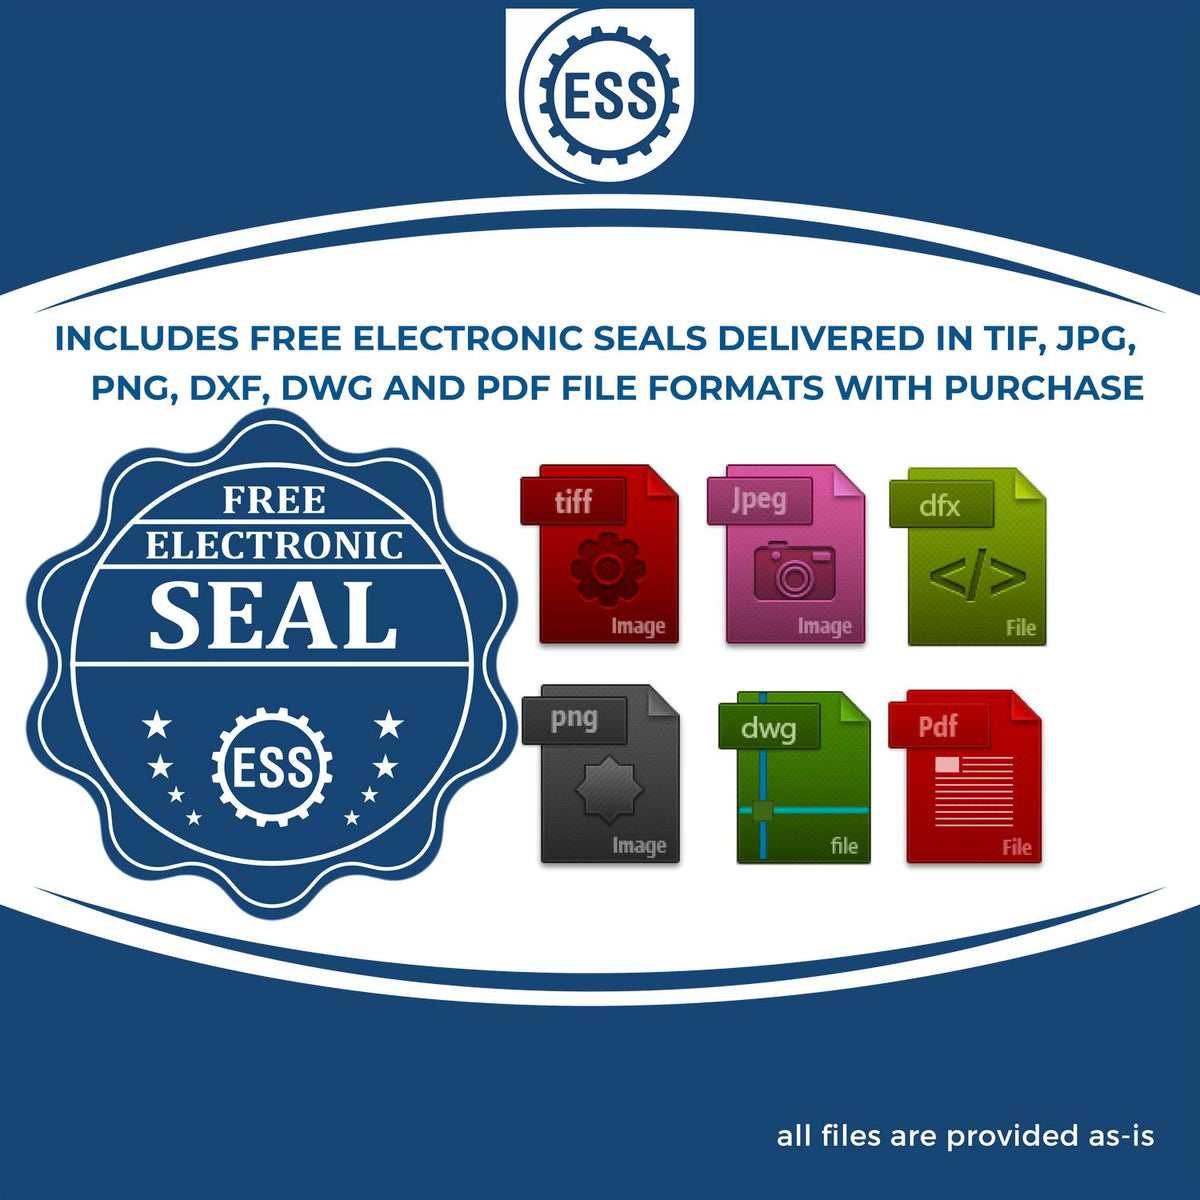 An infographic for the free electronic seal for the PSI Idaho Notary Stamp illustrating the different file type icons such as DXF, DWG, TIF, JPG and PNG.